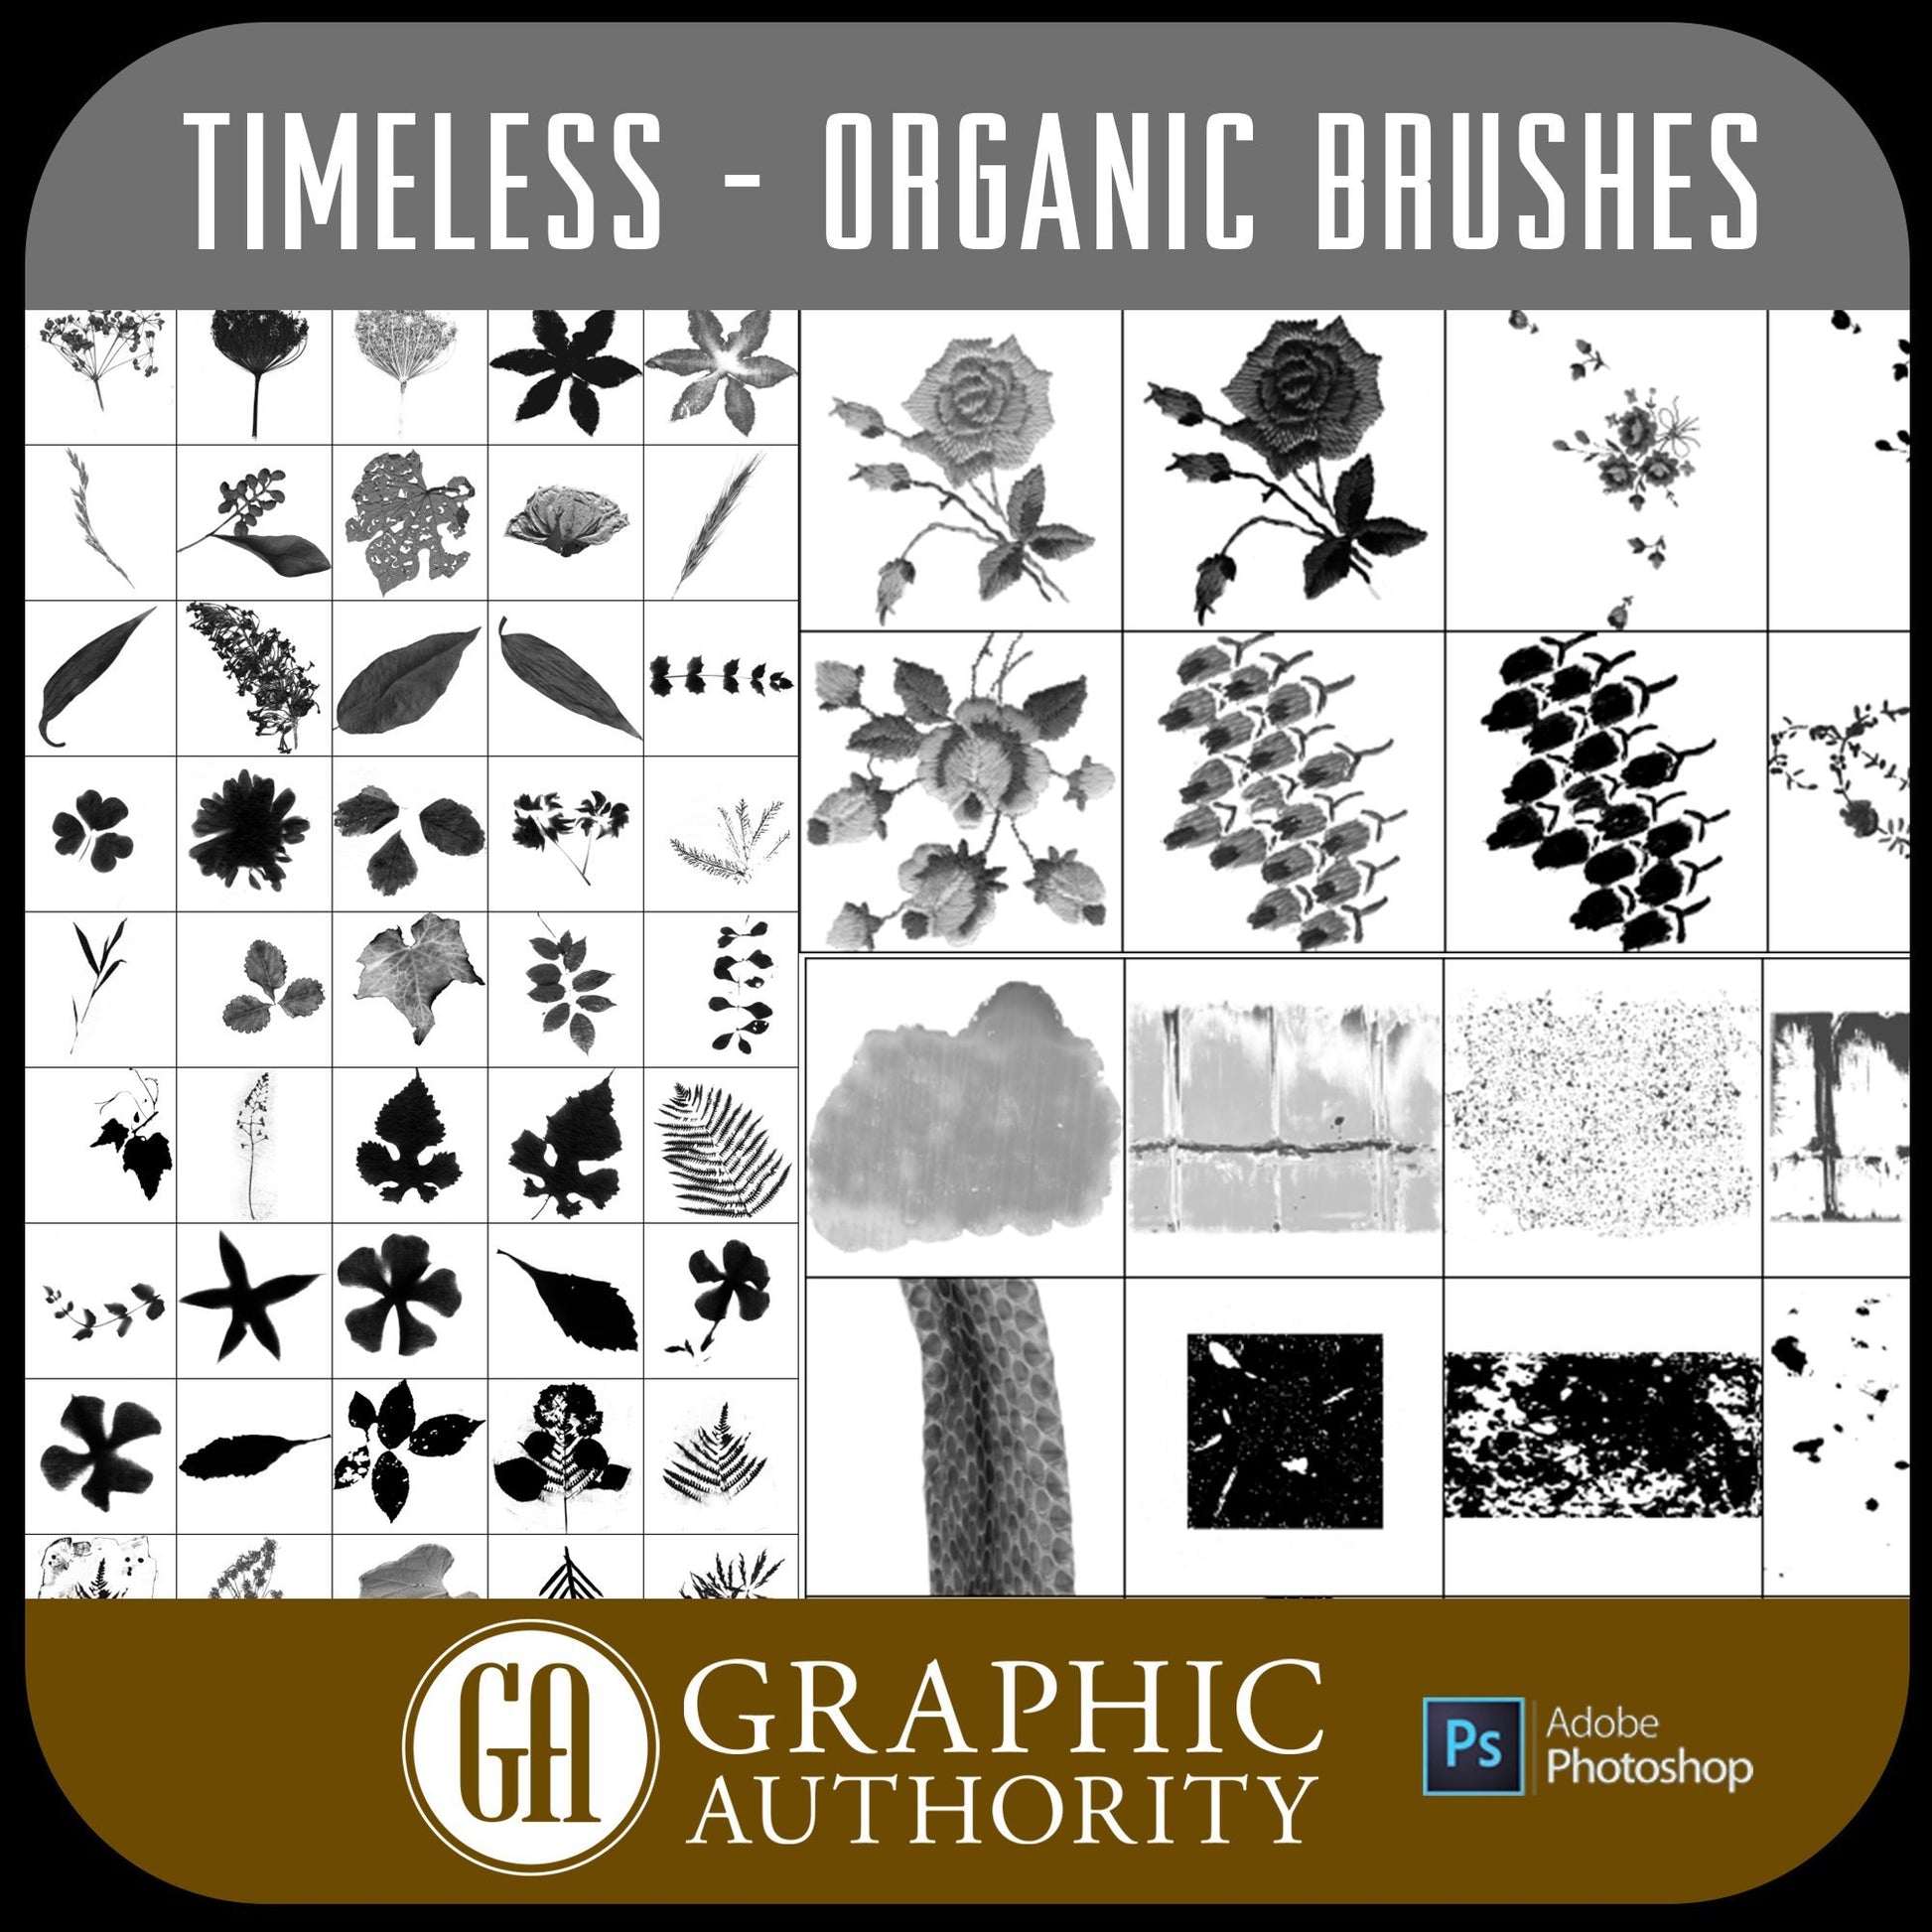 Timeless - Organic - Photoshop ABR Brushes-Photoshop Template - Graphic Authority